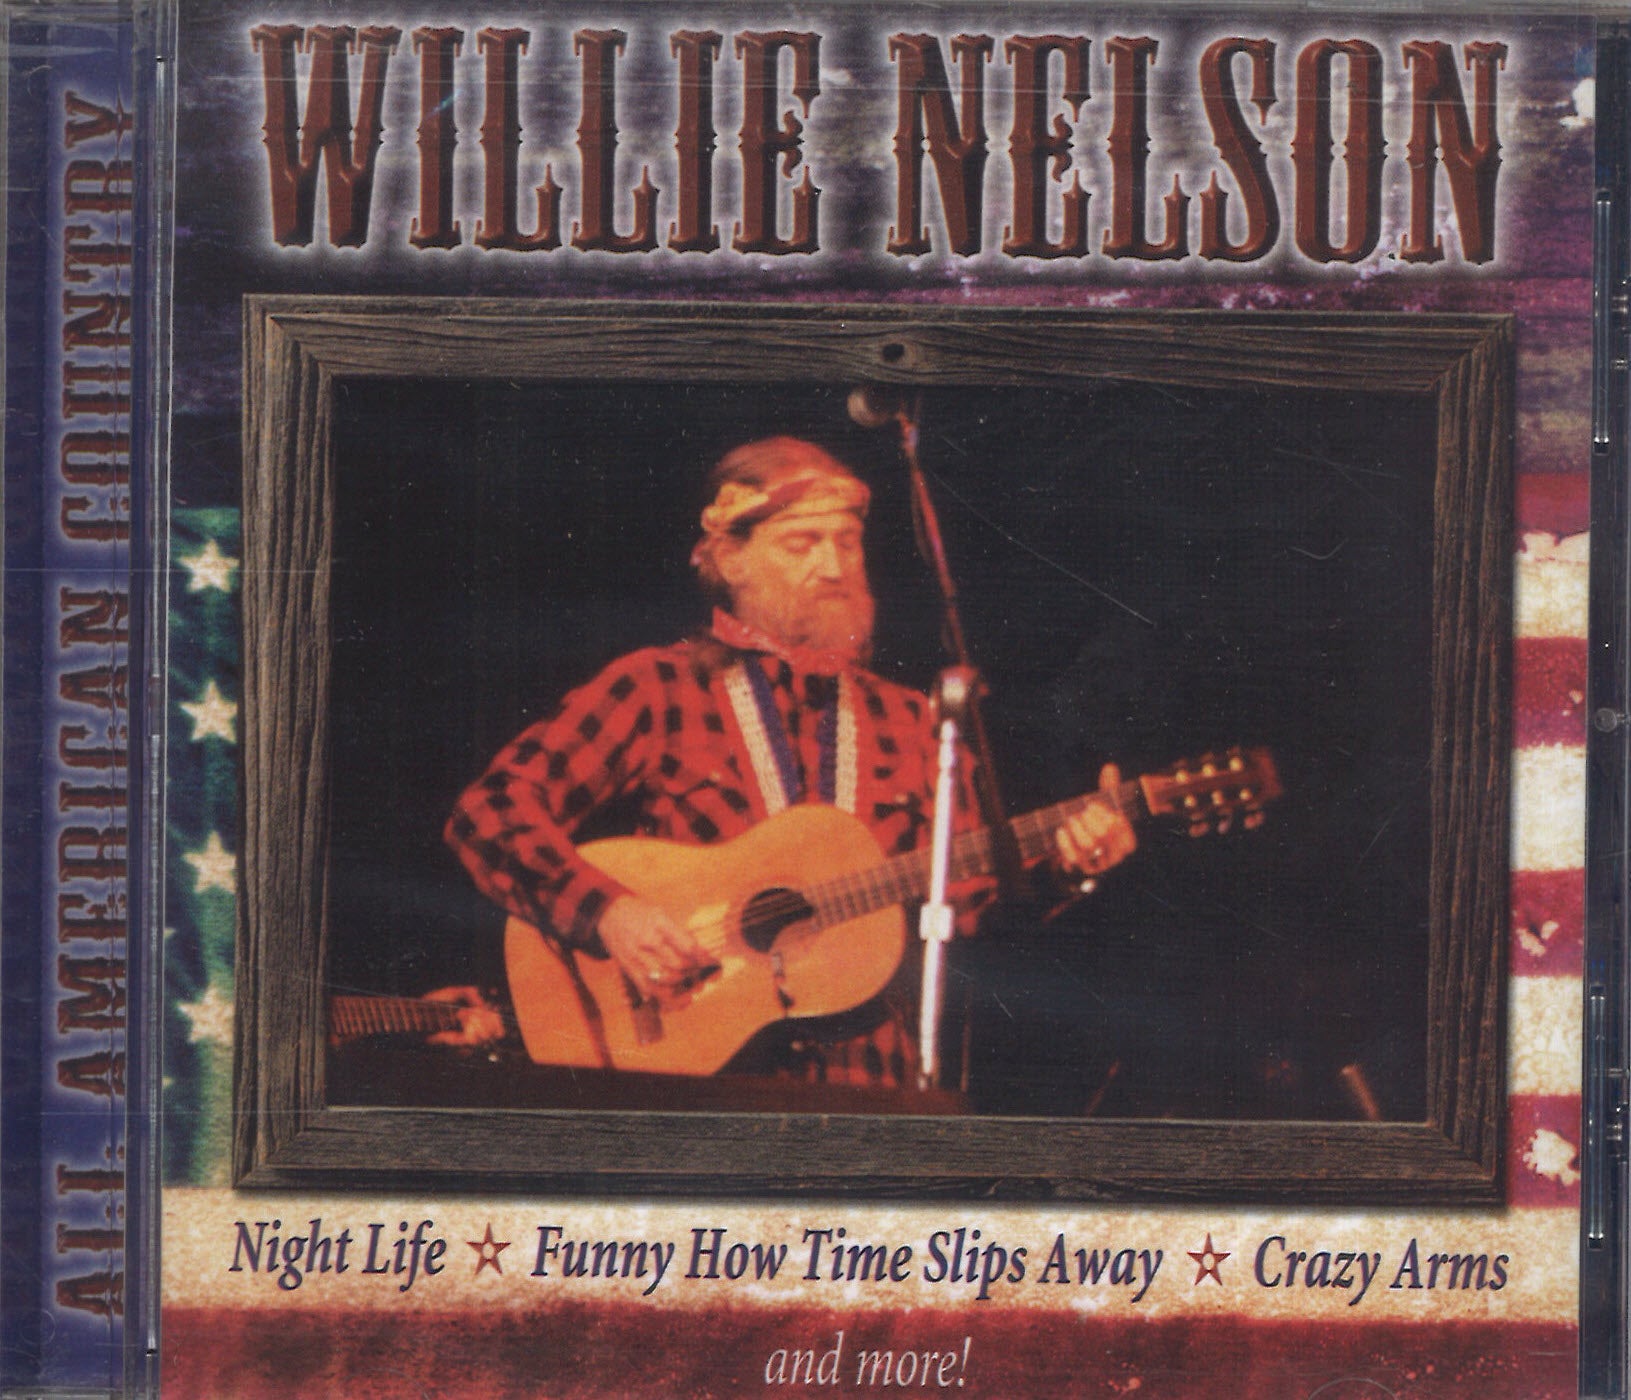 Willie Nelson All American Country